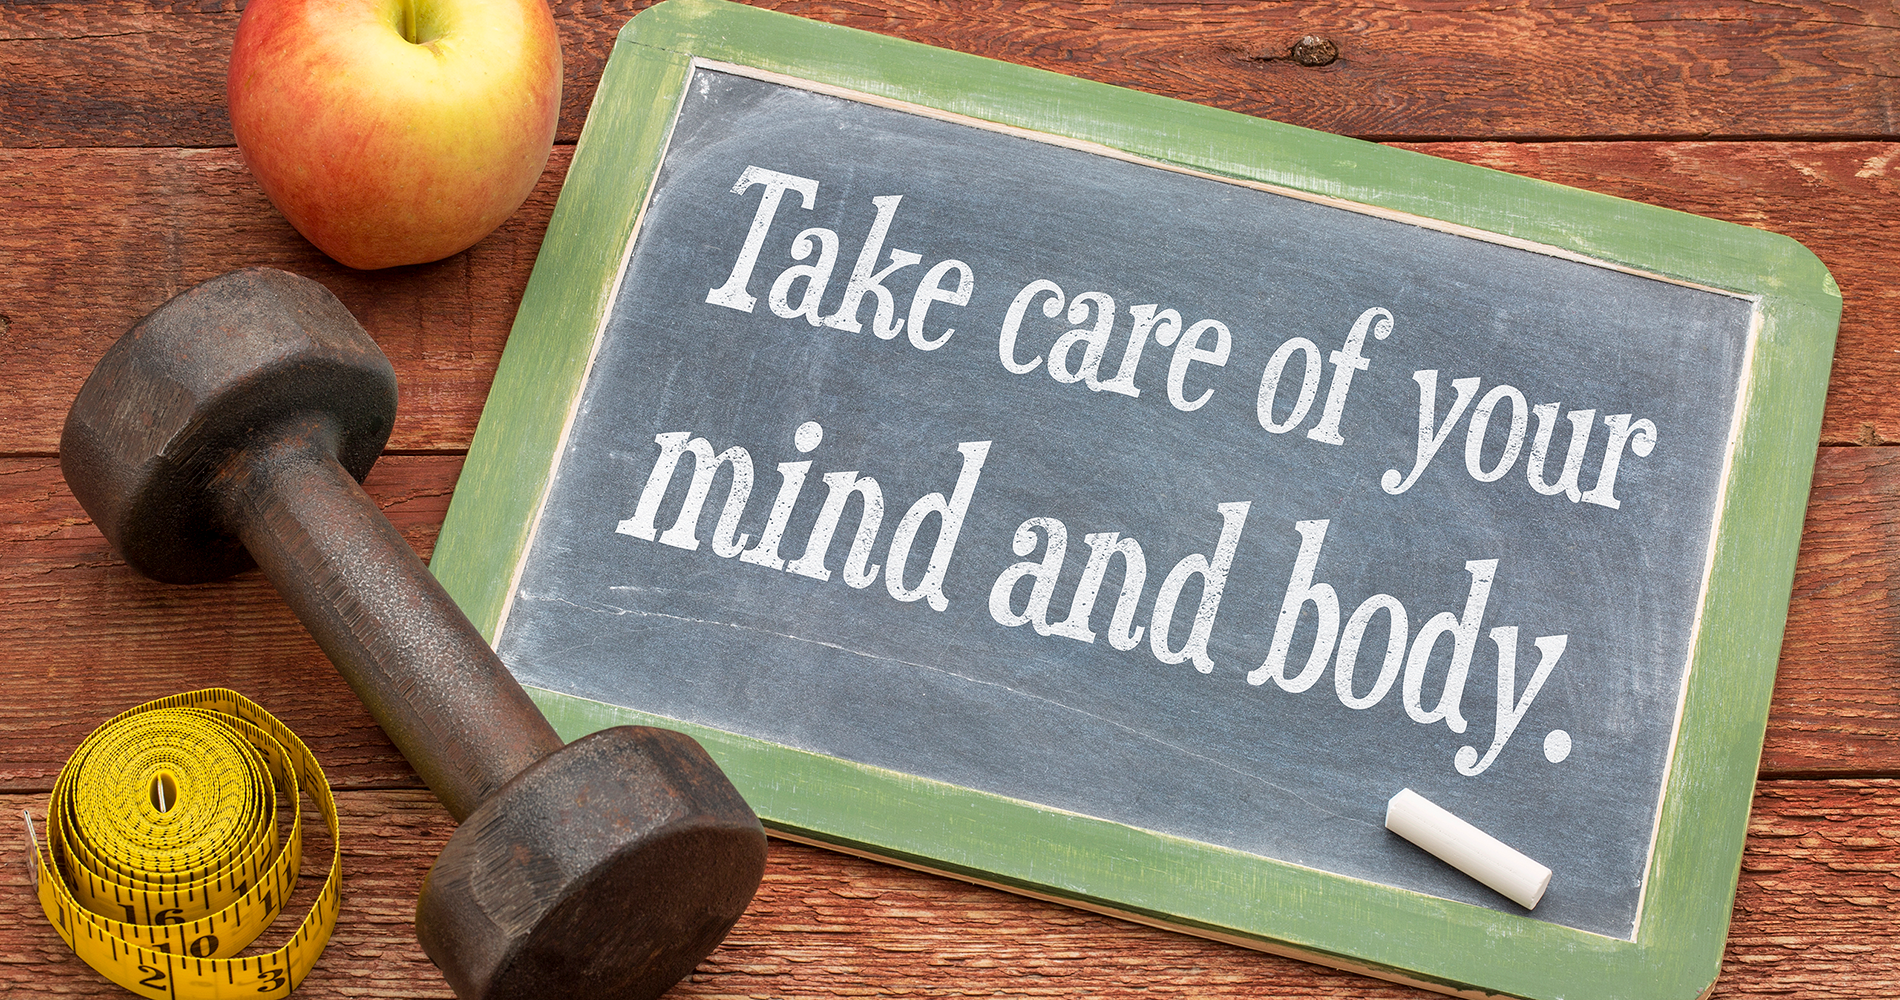 Take care of your mind and body words on a chalkboard